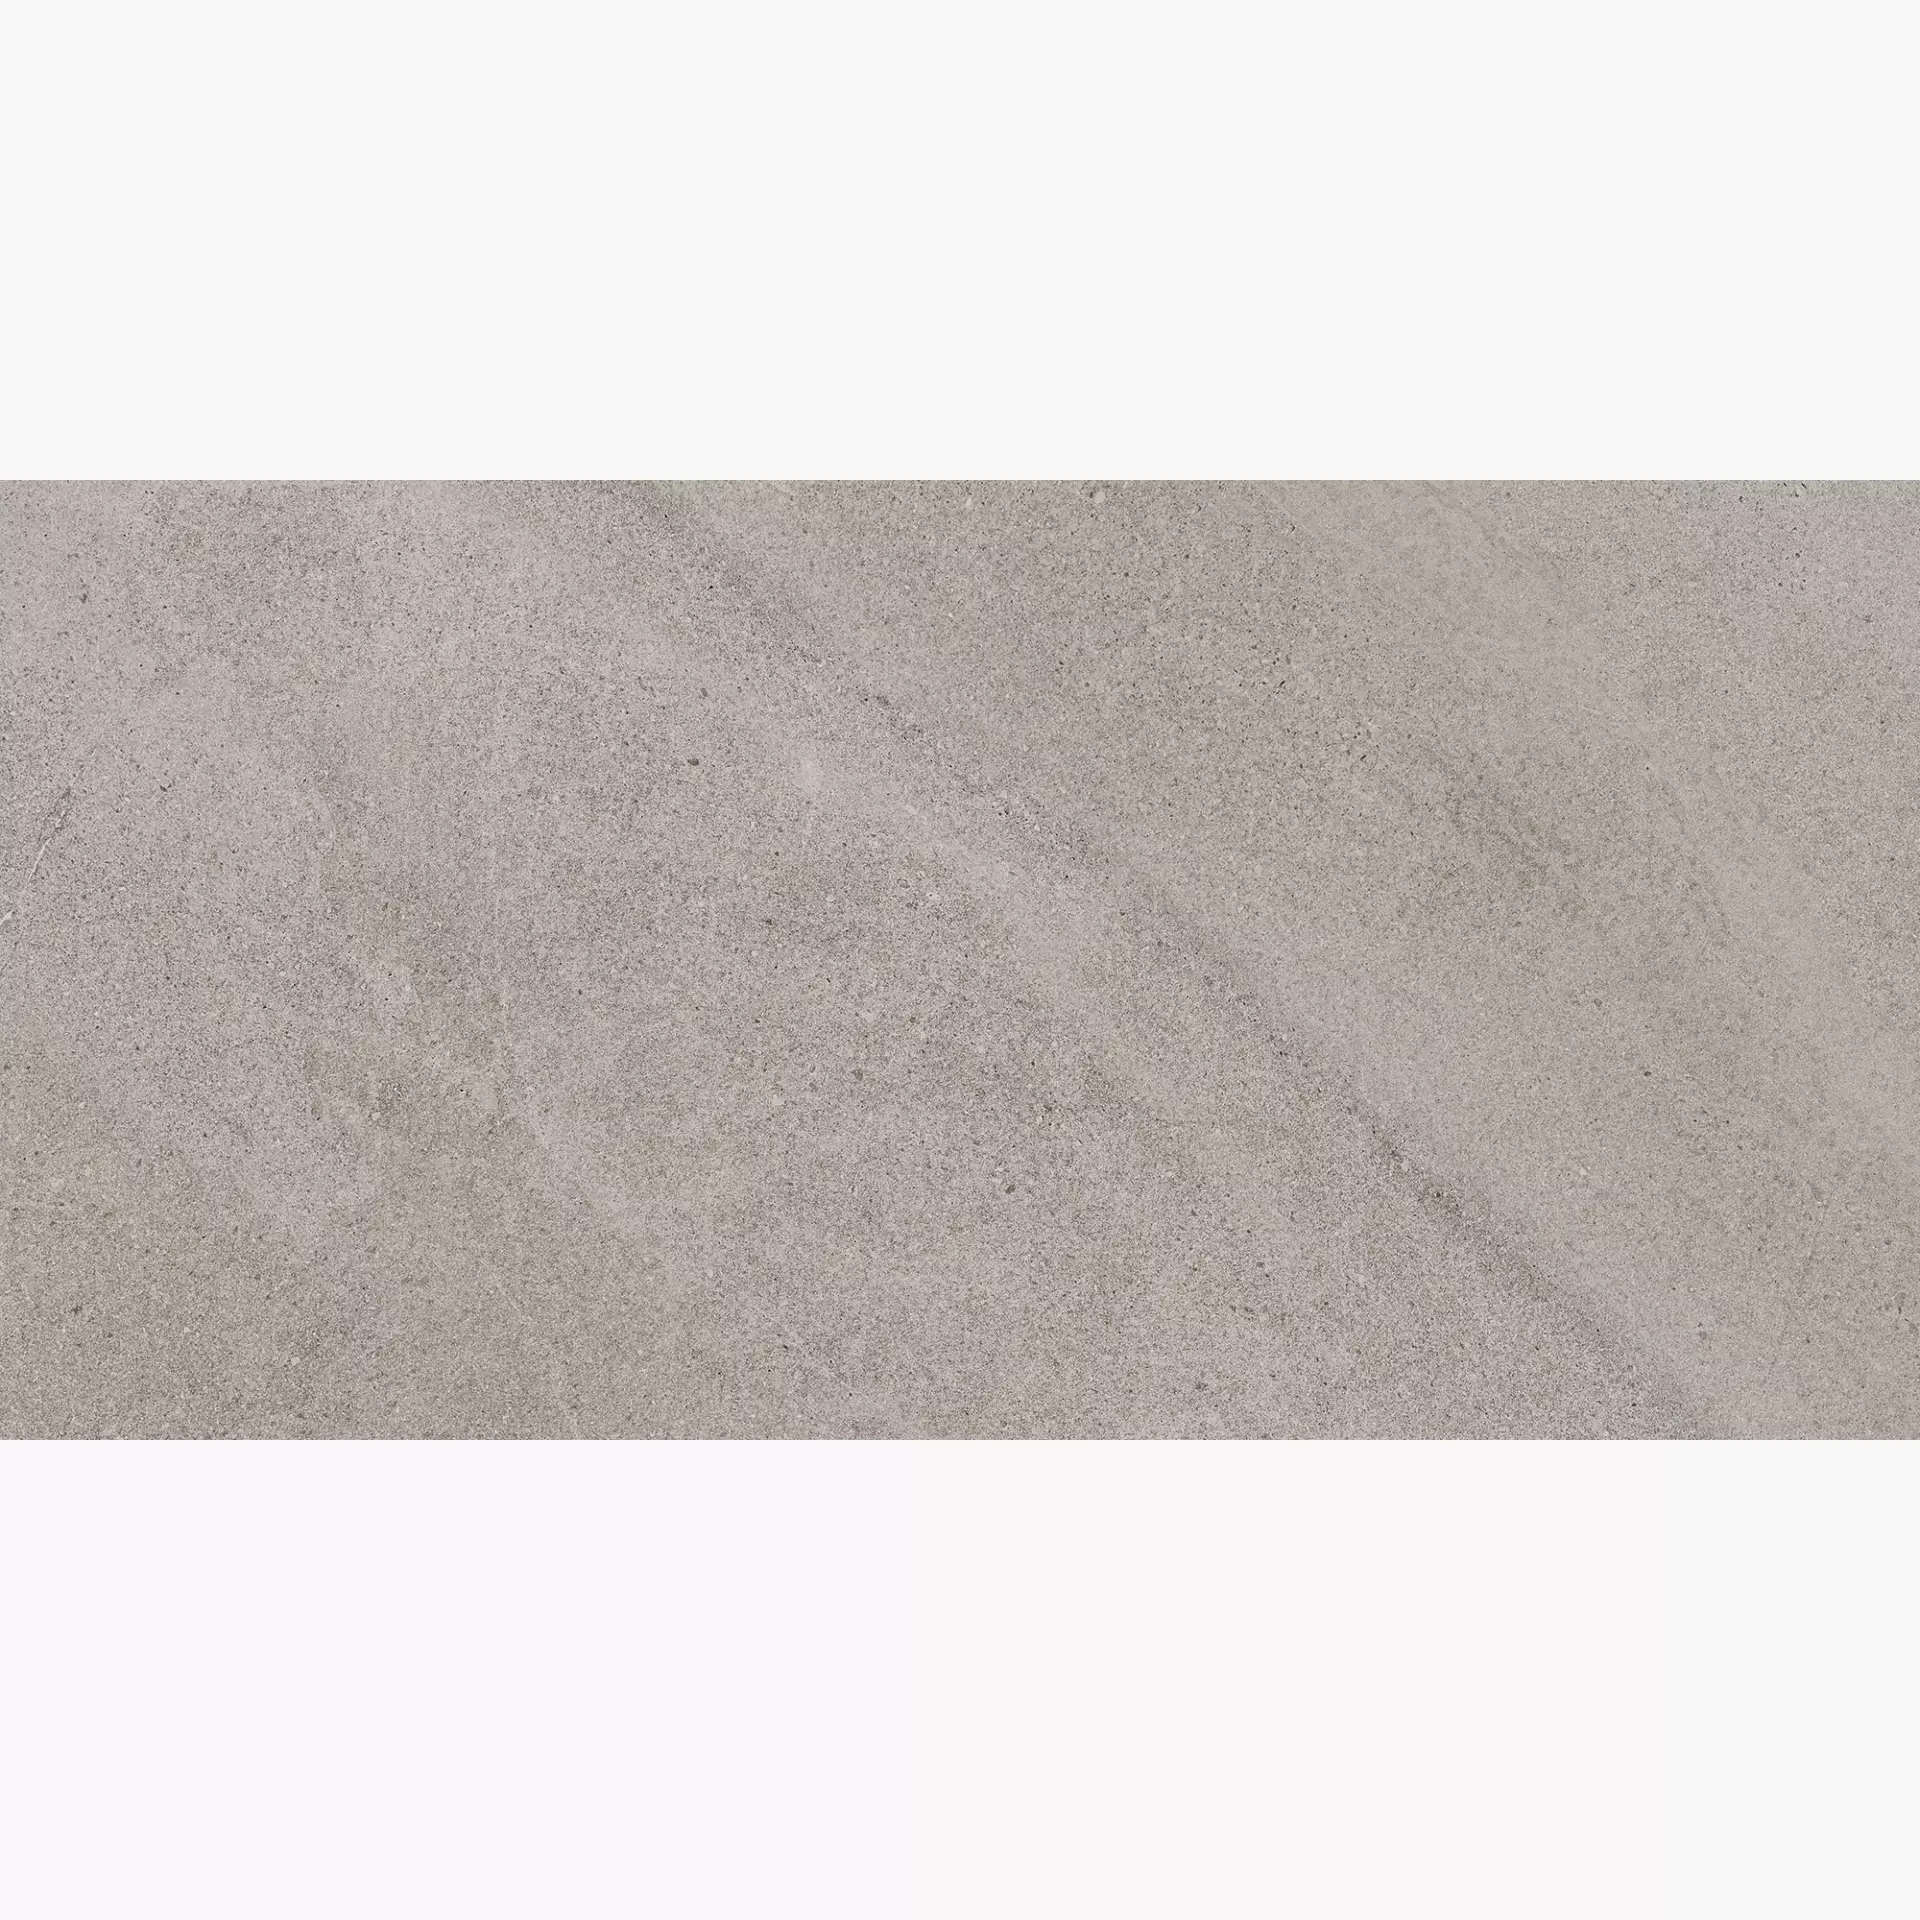 Cottodeste Limestone Oyster Blazed Protect EGXLS25 60x120cm rectified 14mm